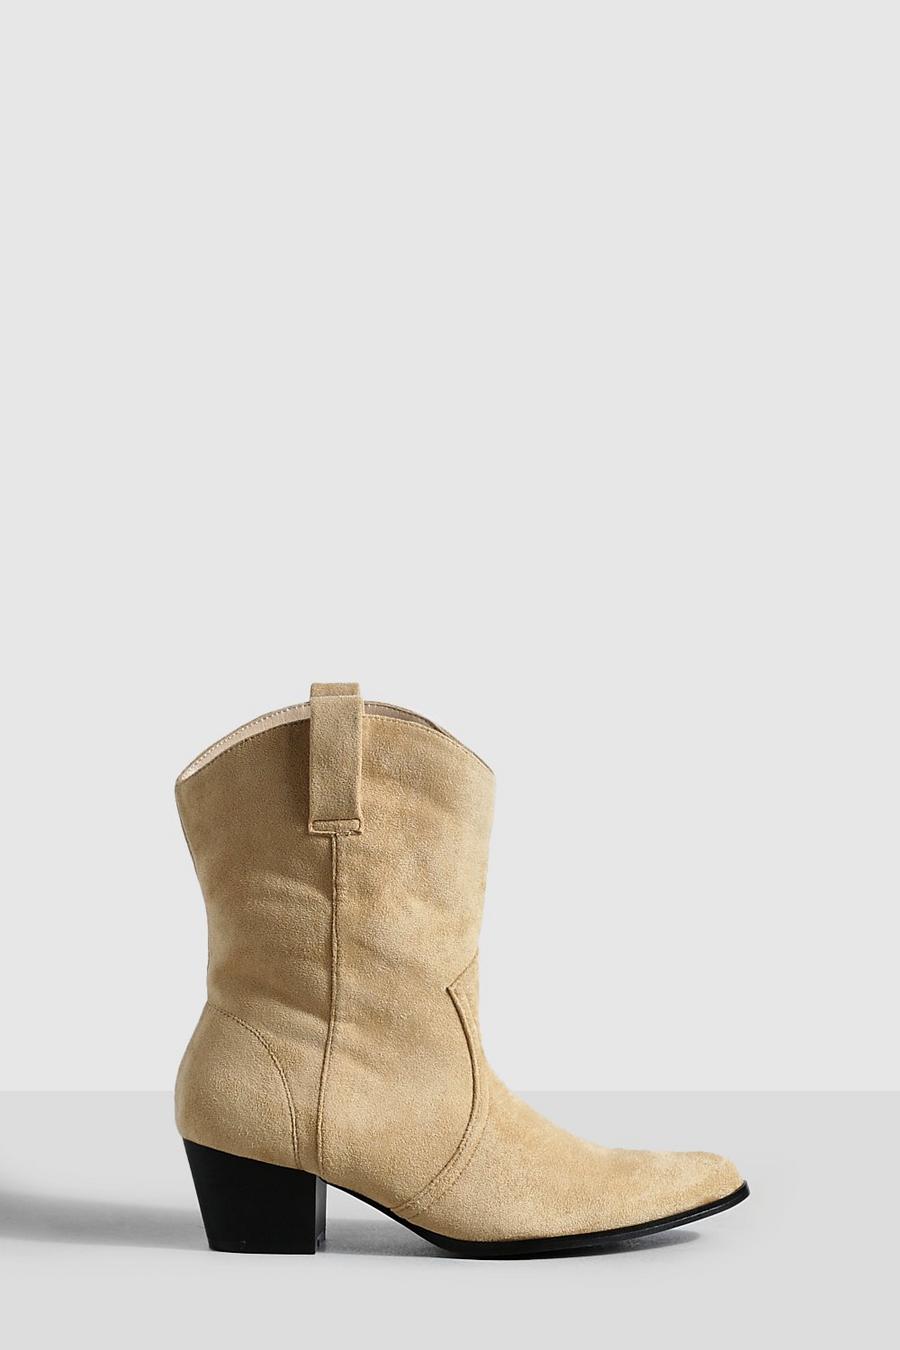 Beige Wide Fit Basic Tab Detail Western Cowboy Ankle Boots